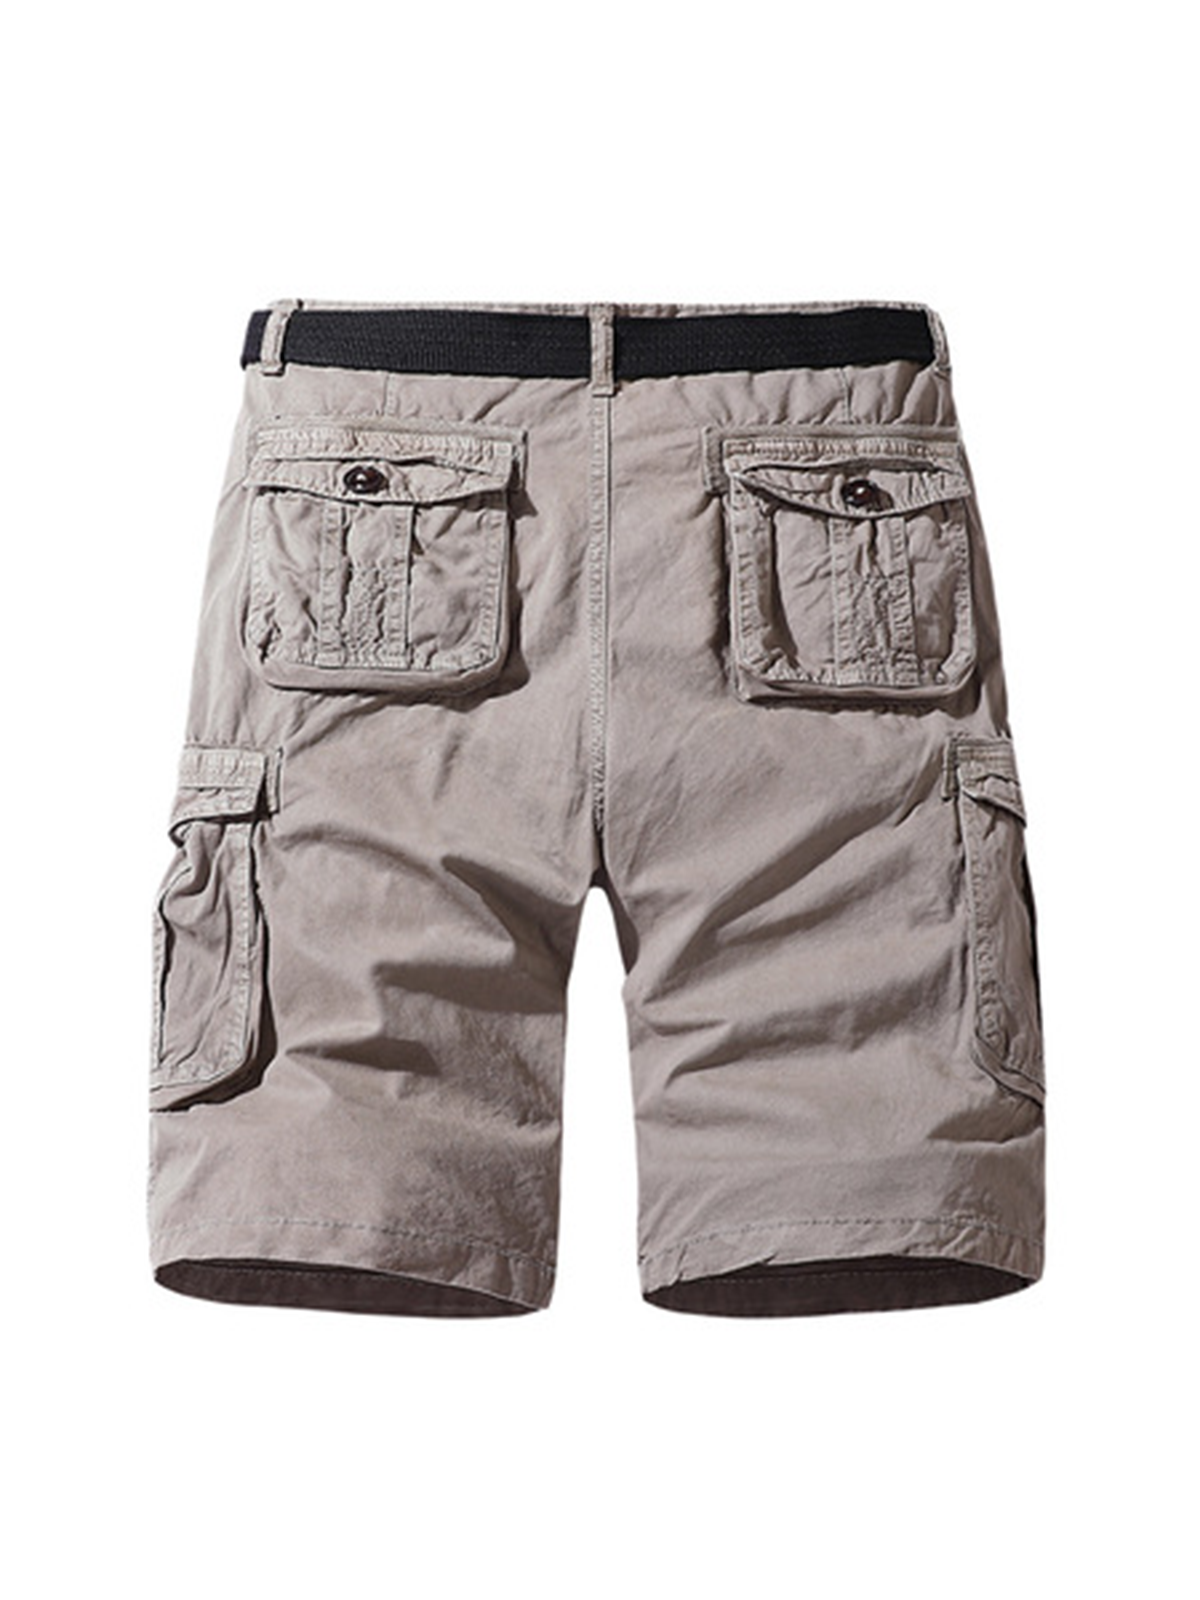 Multi-pocket Workwear Casual Cotton Cropped Shorts test